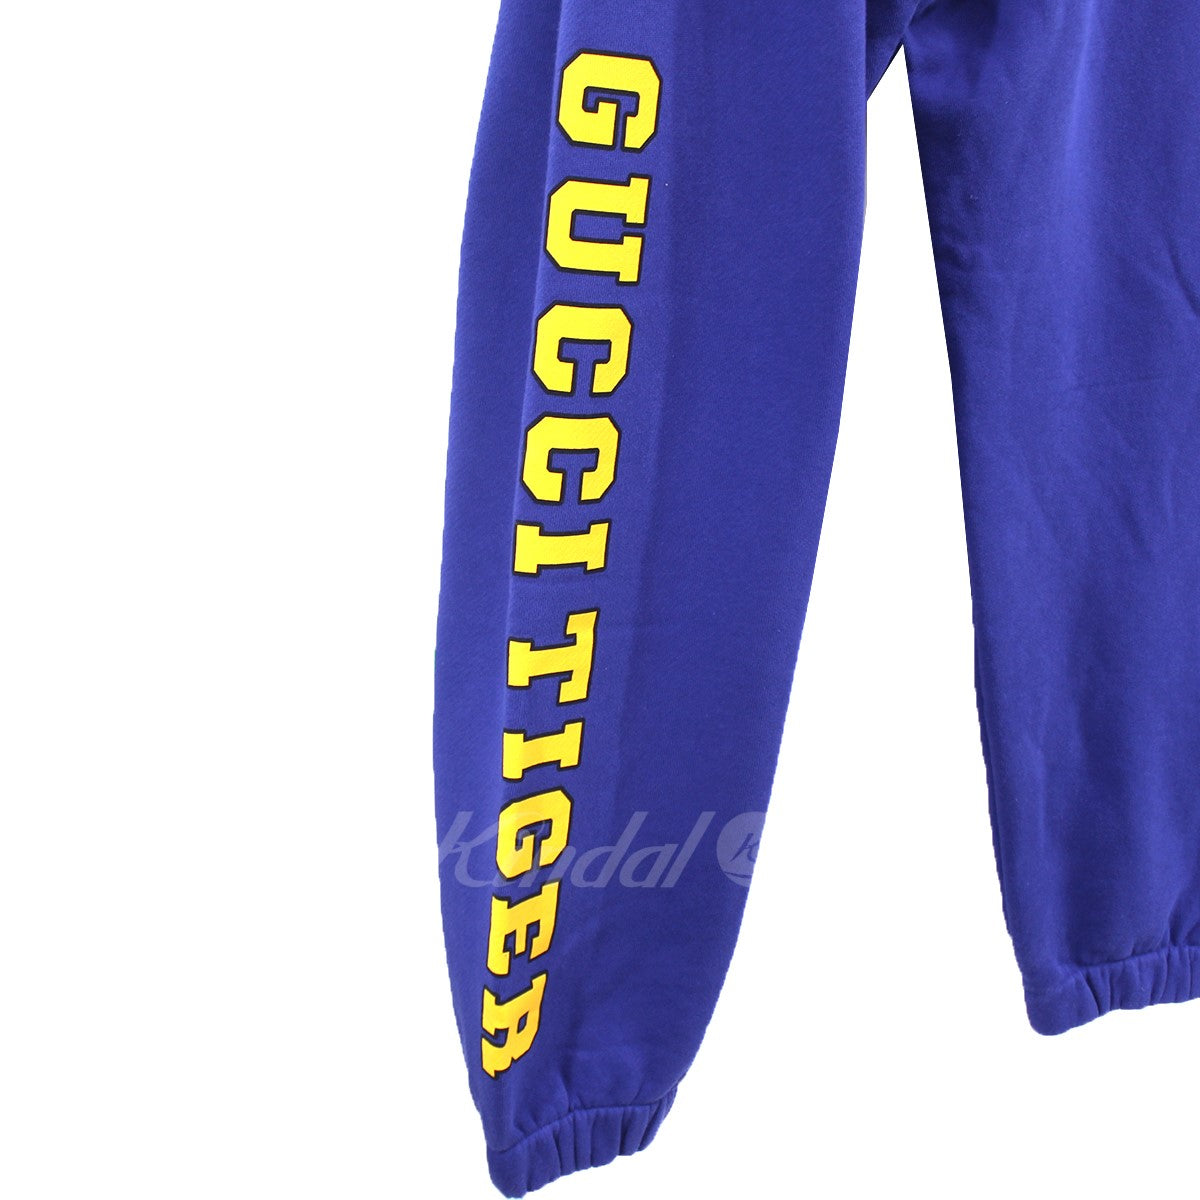 22SS Gucci Tiger cotton jogging pant in blue パンツ